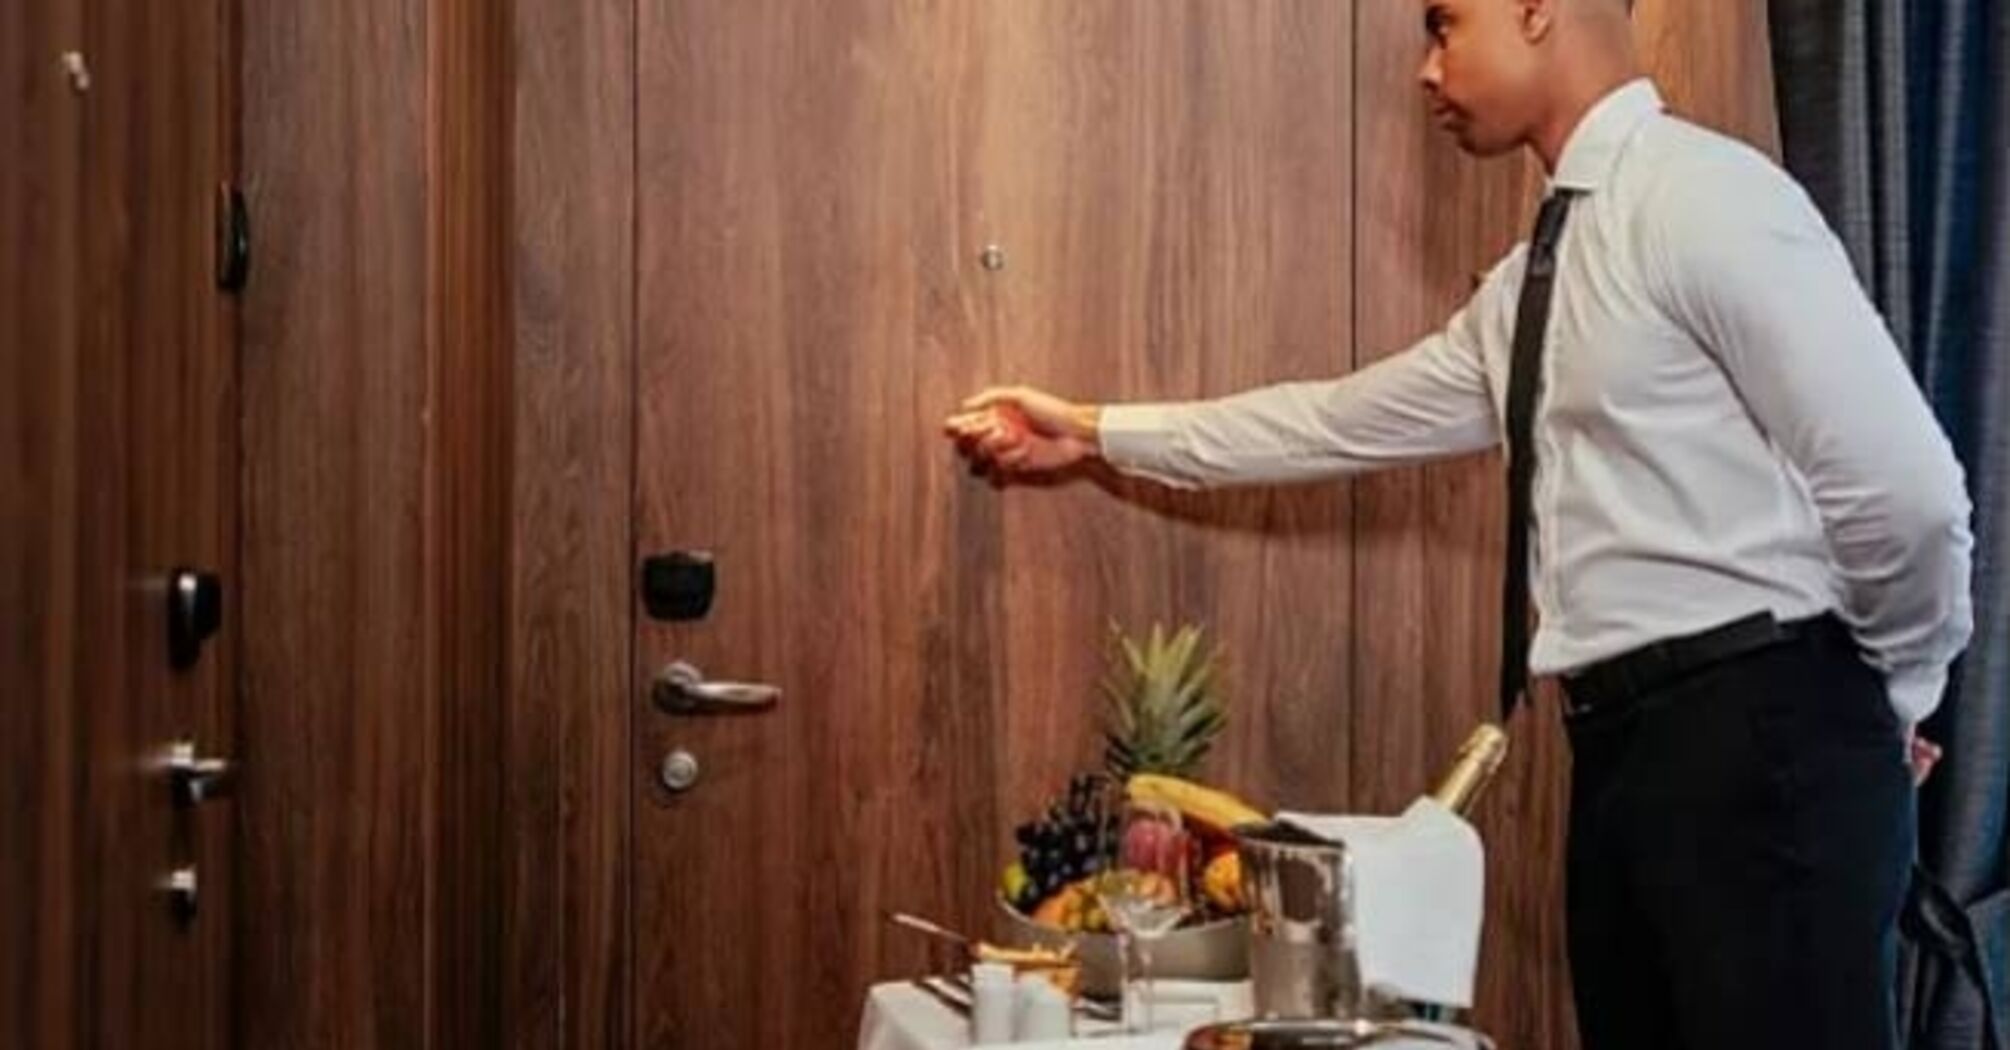 The strangest orders in hotel rooms